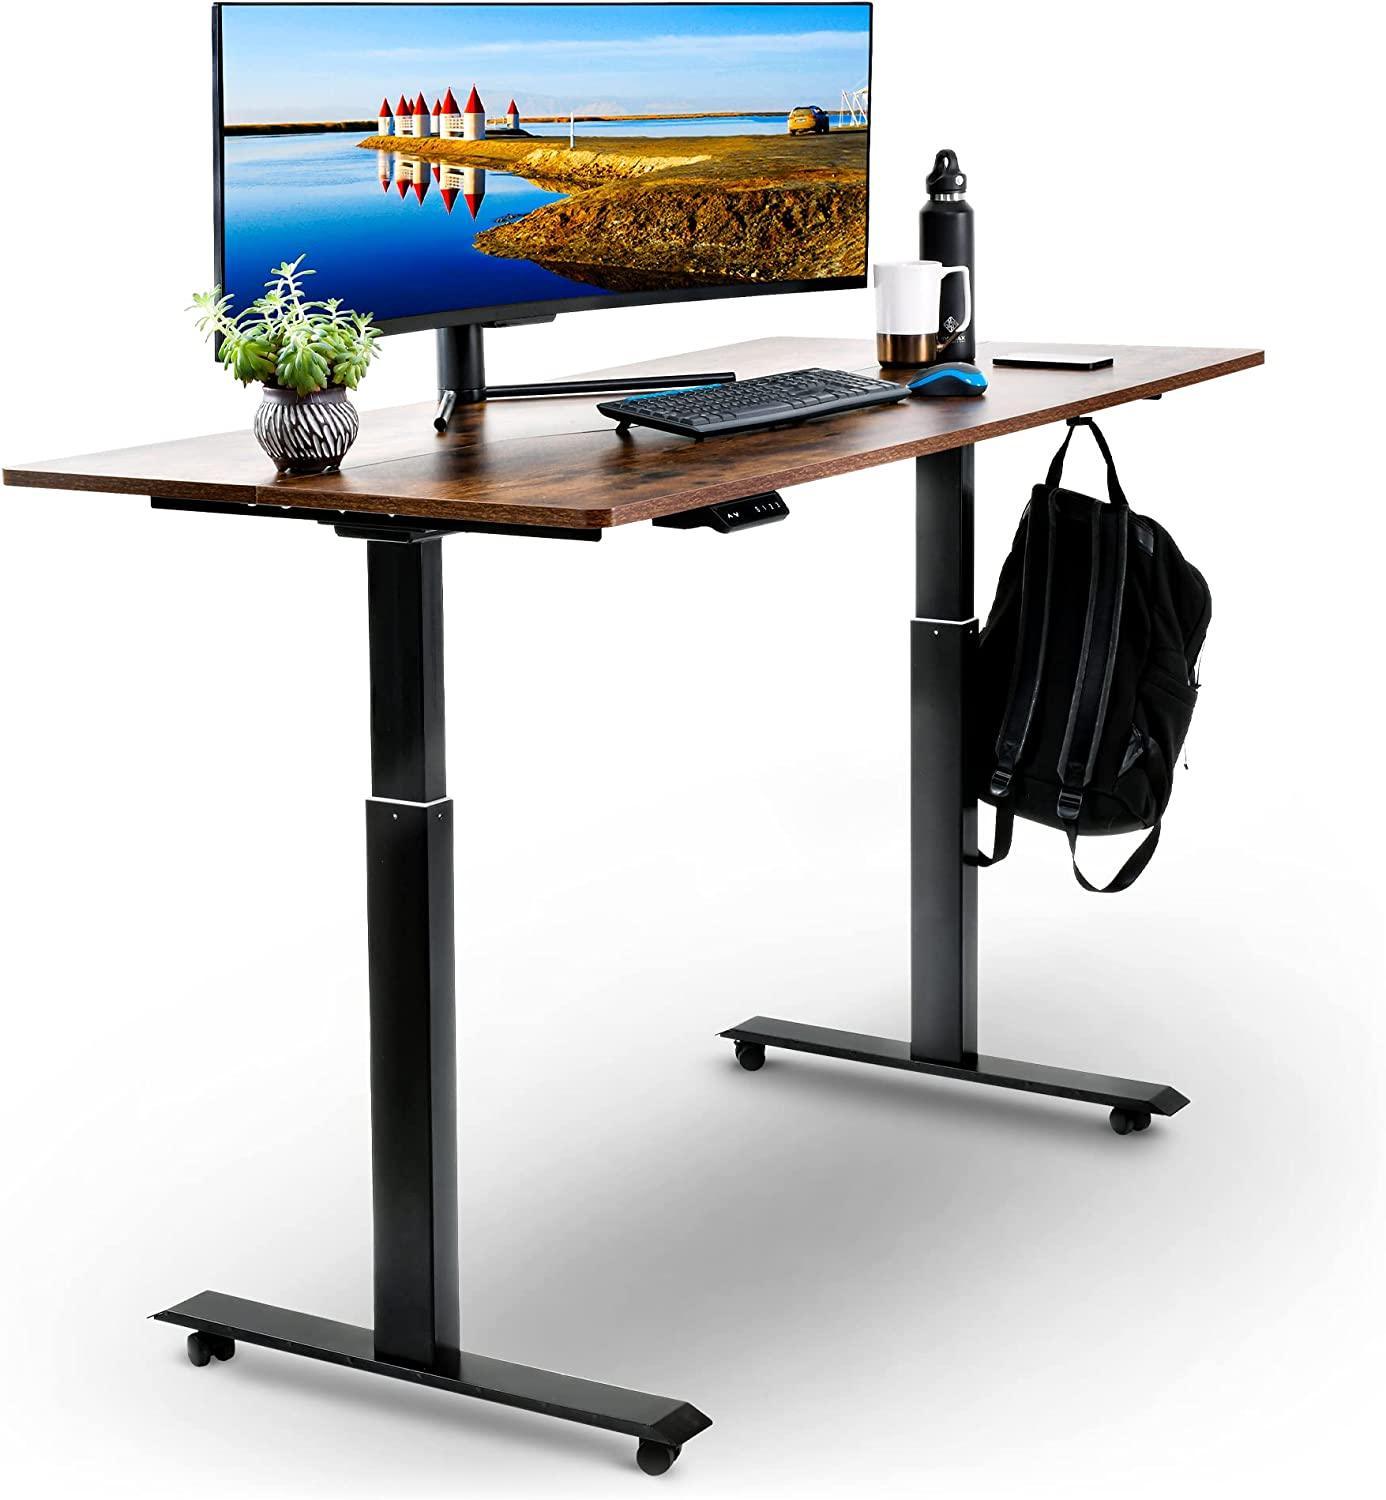 SuperHandy Adjustable Standing Desk - 60" x 30" Table-Top, Programmable Memory Presets, Wireless Charging Pad - DIY Tools by GreatCircleUS